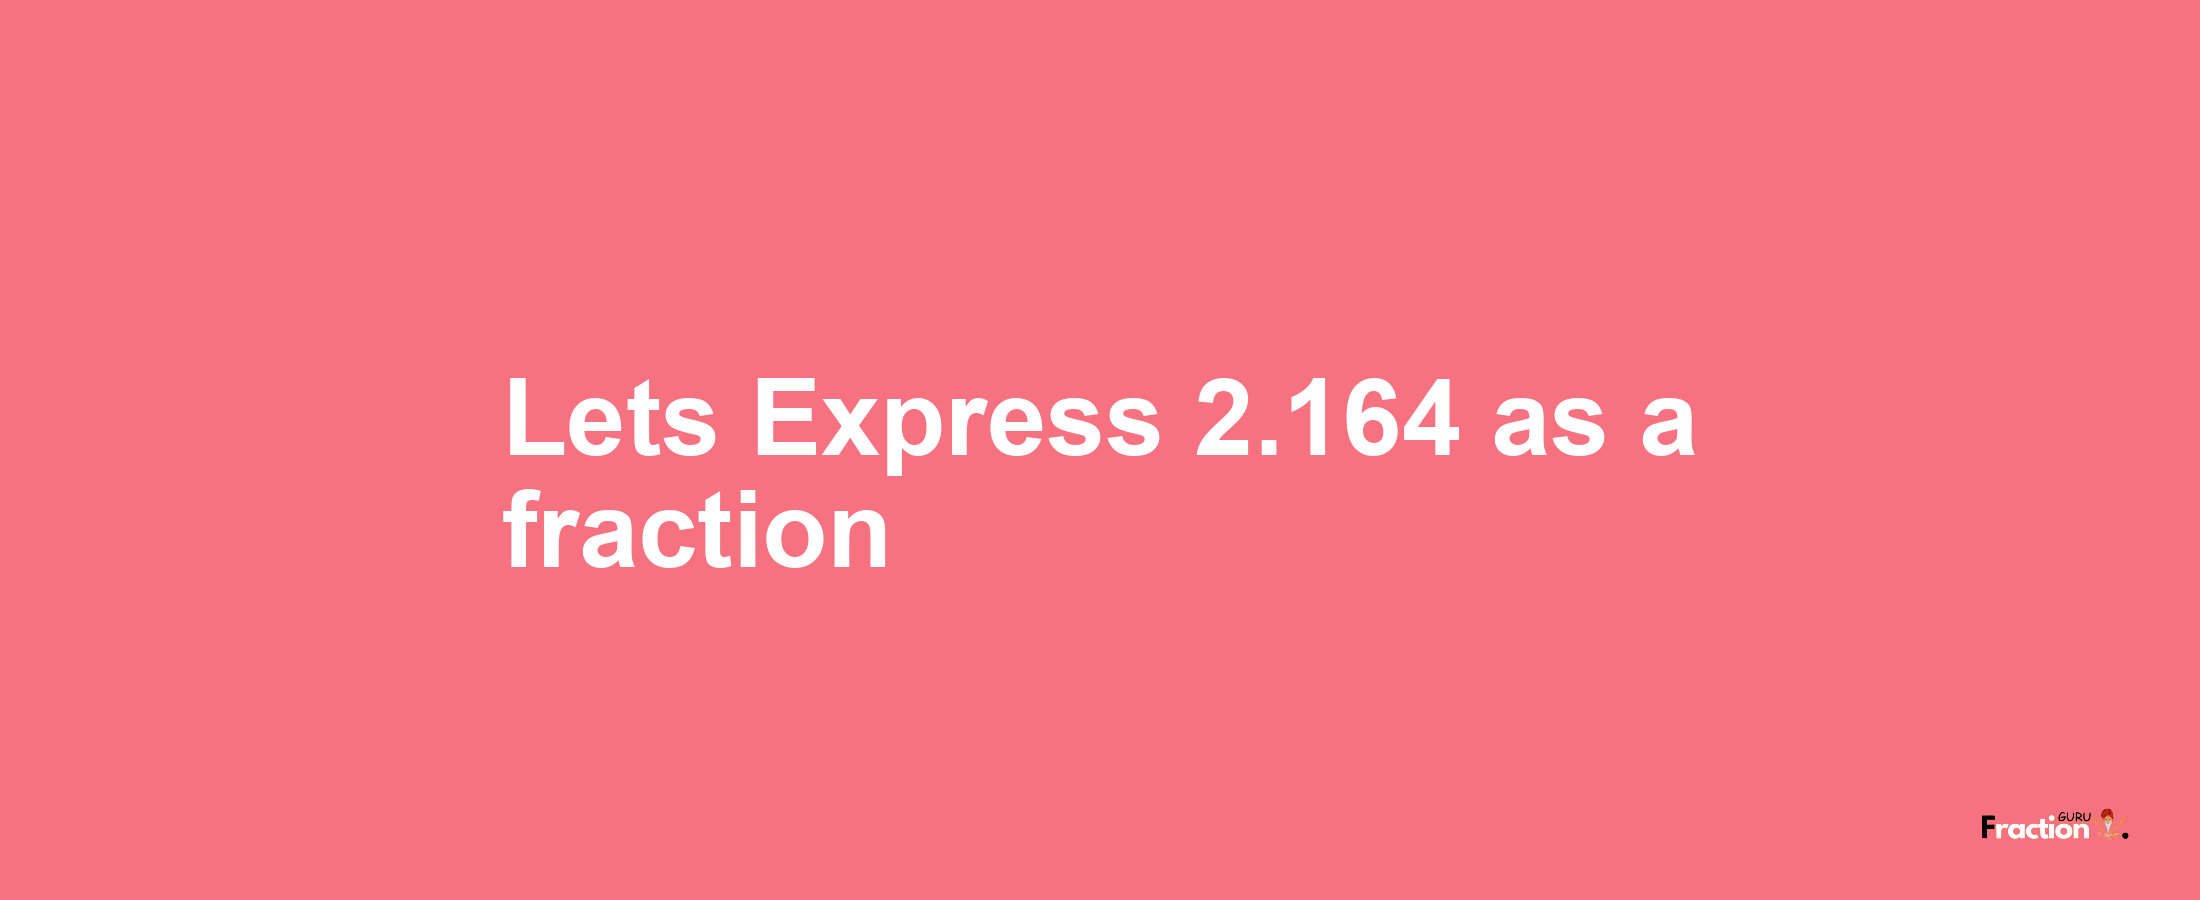 Lets Express 2.164 as afraction